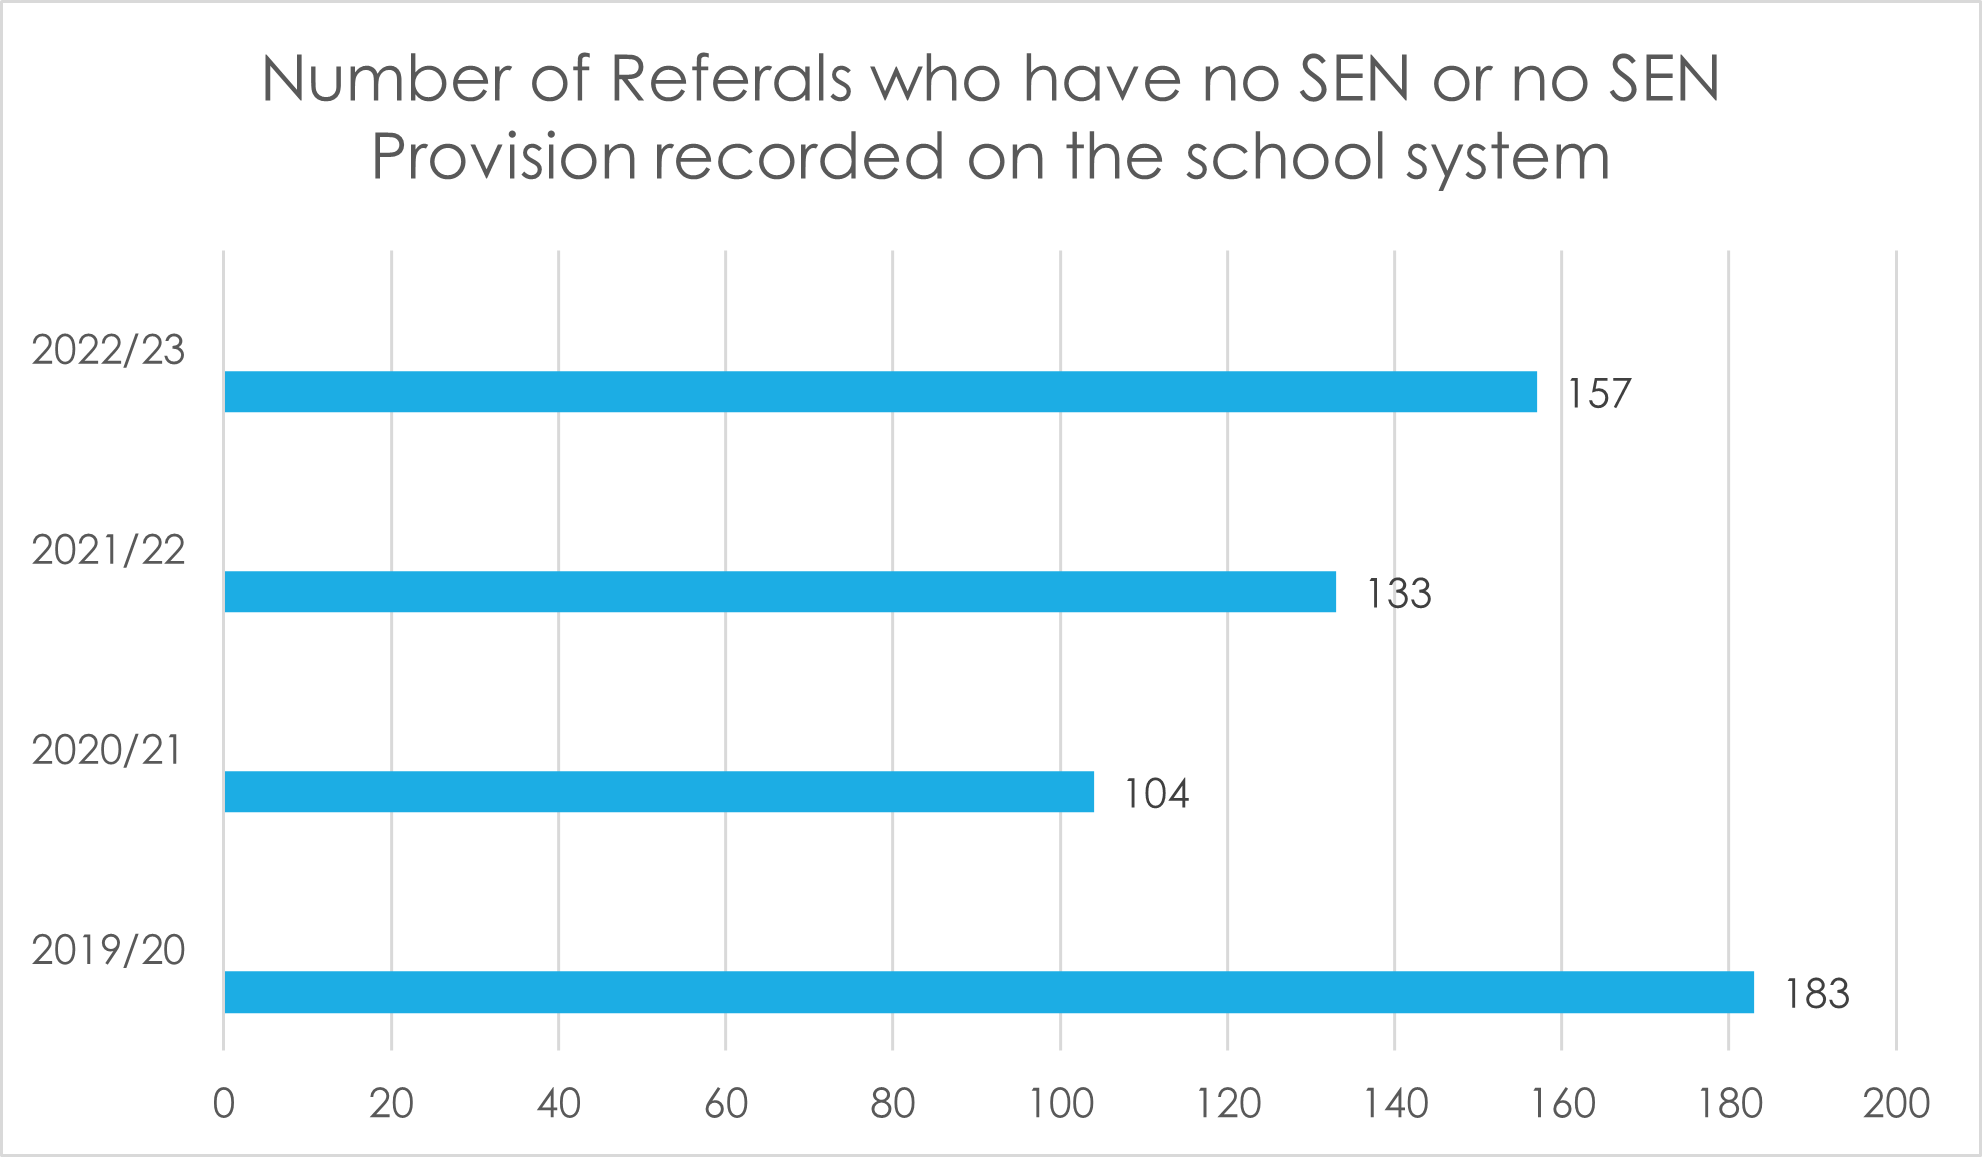 Number of referrals who have no sen 2023